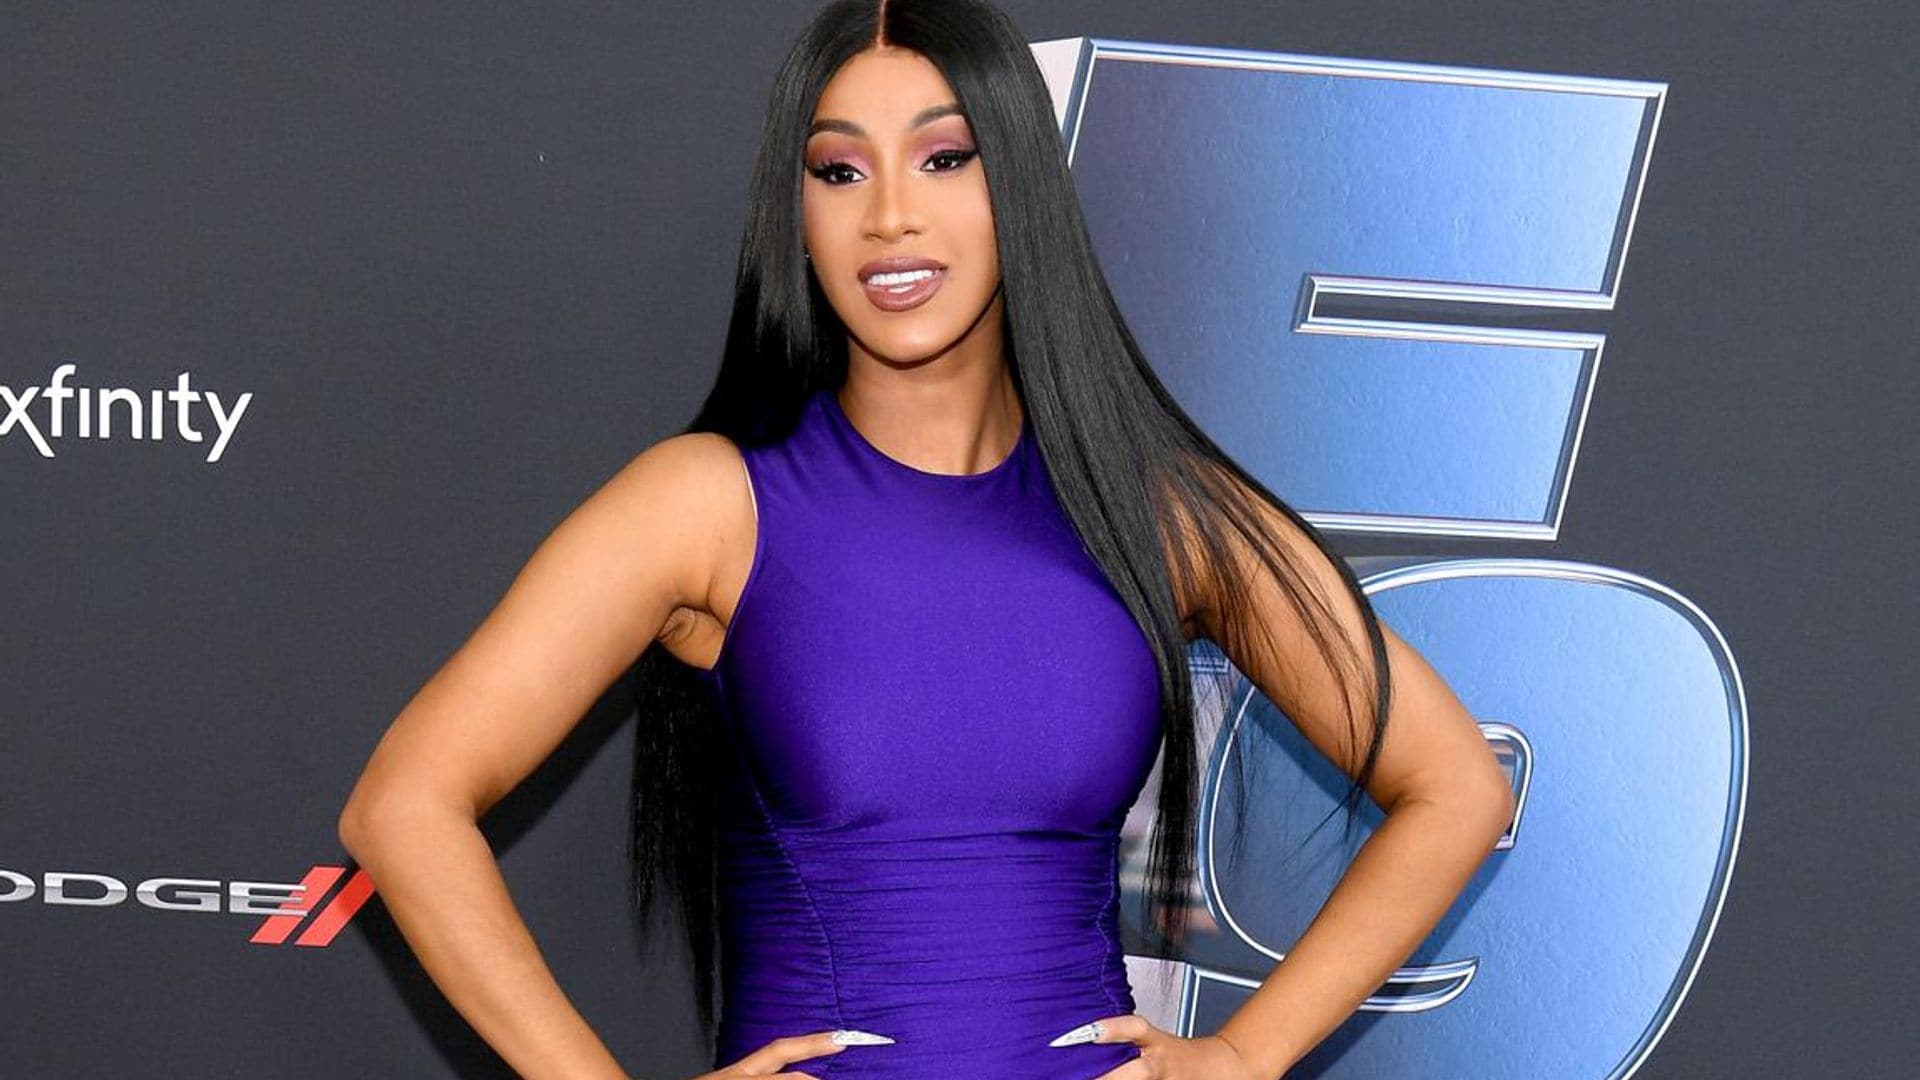 Cardi B explains how she accidentally posted that topless photo